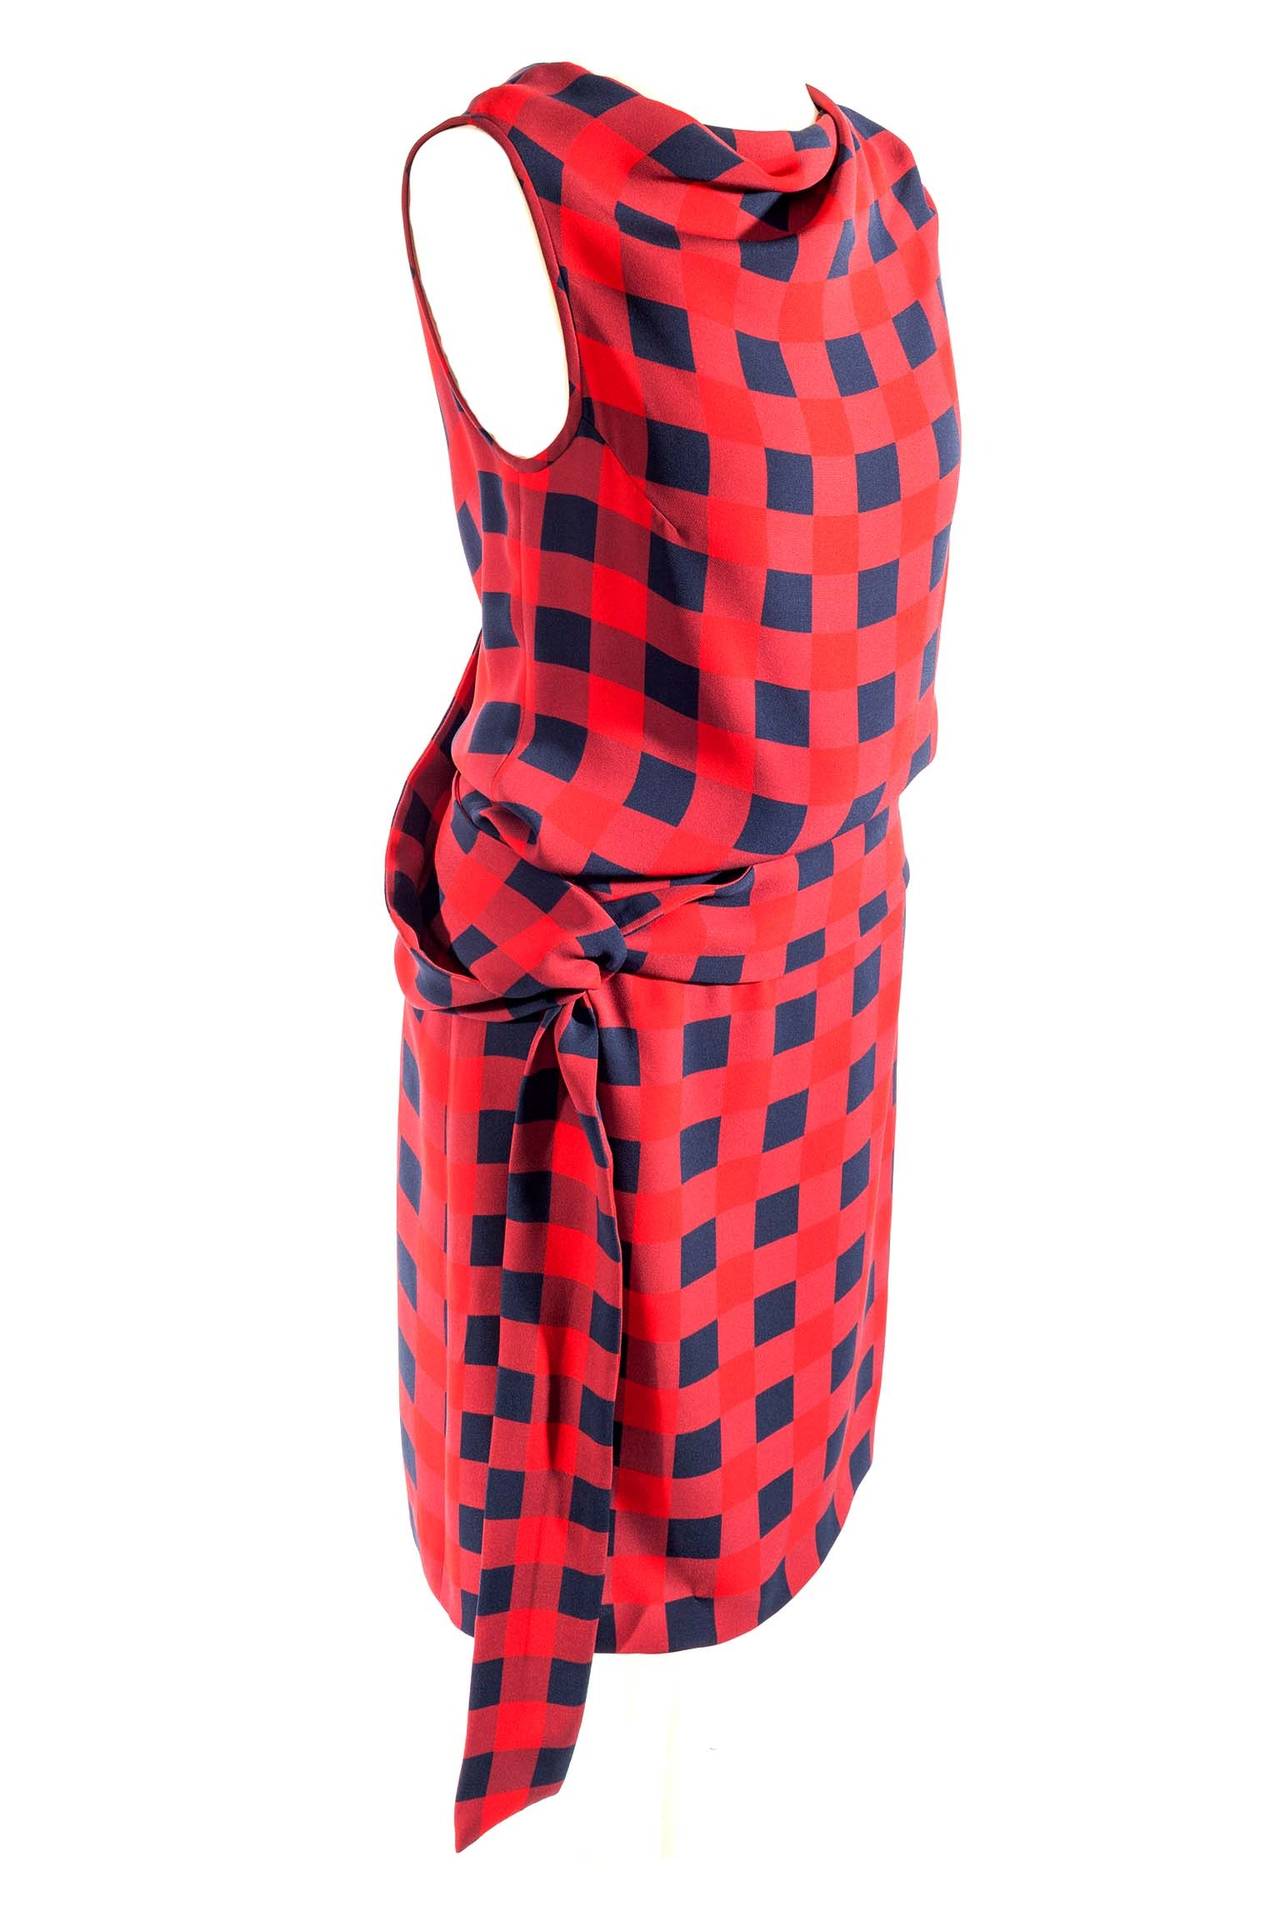 Alexander McQueen red blue plaid dress. Dress is sleeveless with boat neck and slight cowl neck. Dress has back and waist straps that tie on side, side zipper and 3 snaps. Dress is unlined.